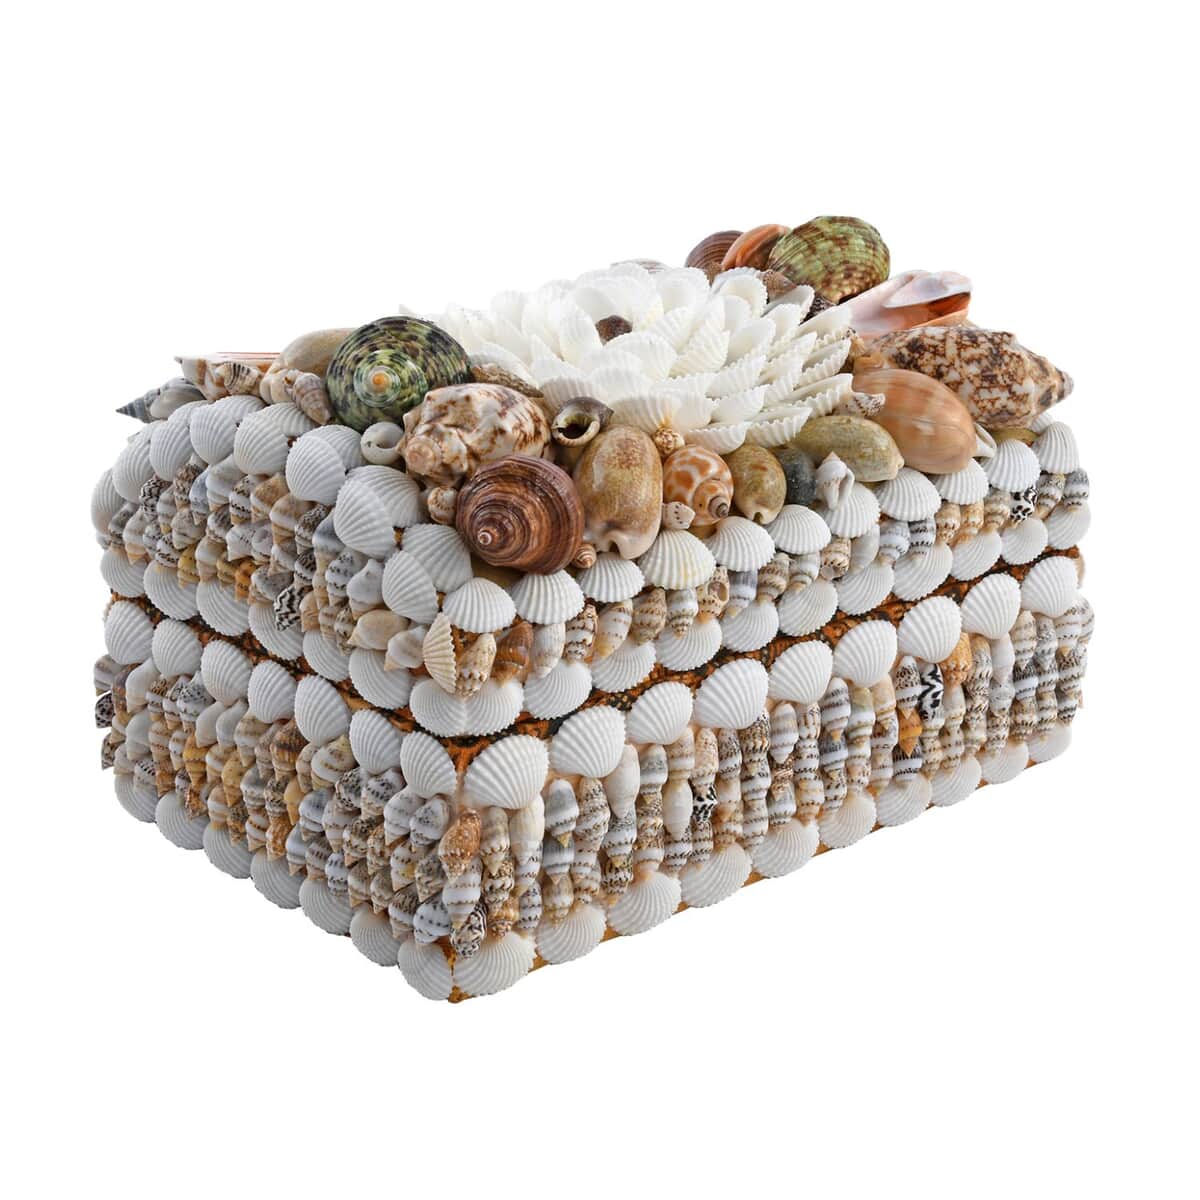 Multi Color Sea Shell Encrusted Treasure Chest Shaped Box image number 3